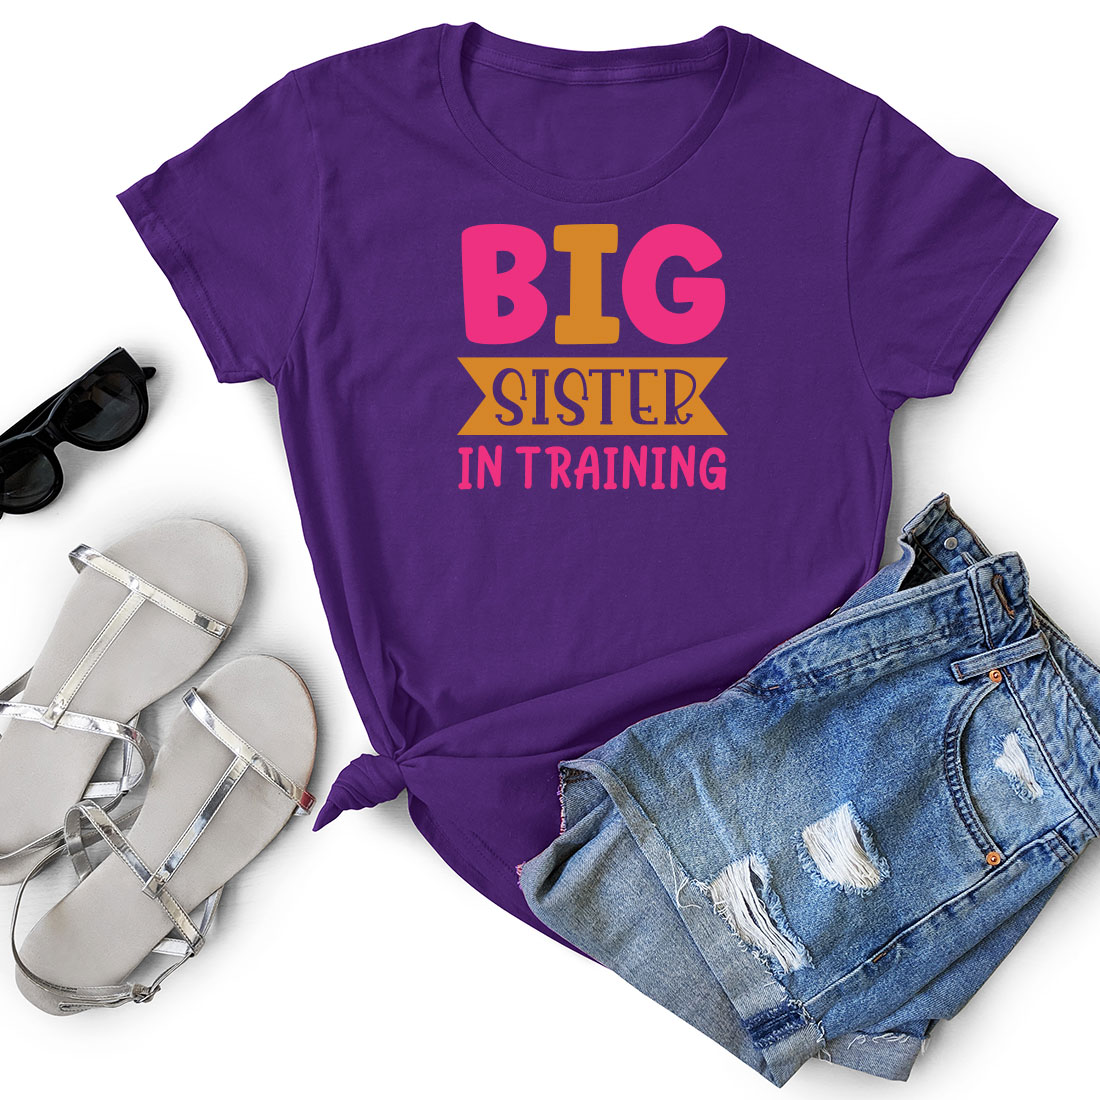 Purple shirt that says big sister in training.